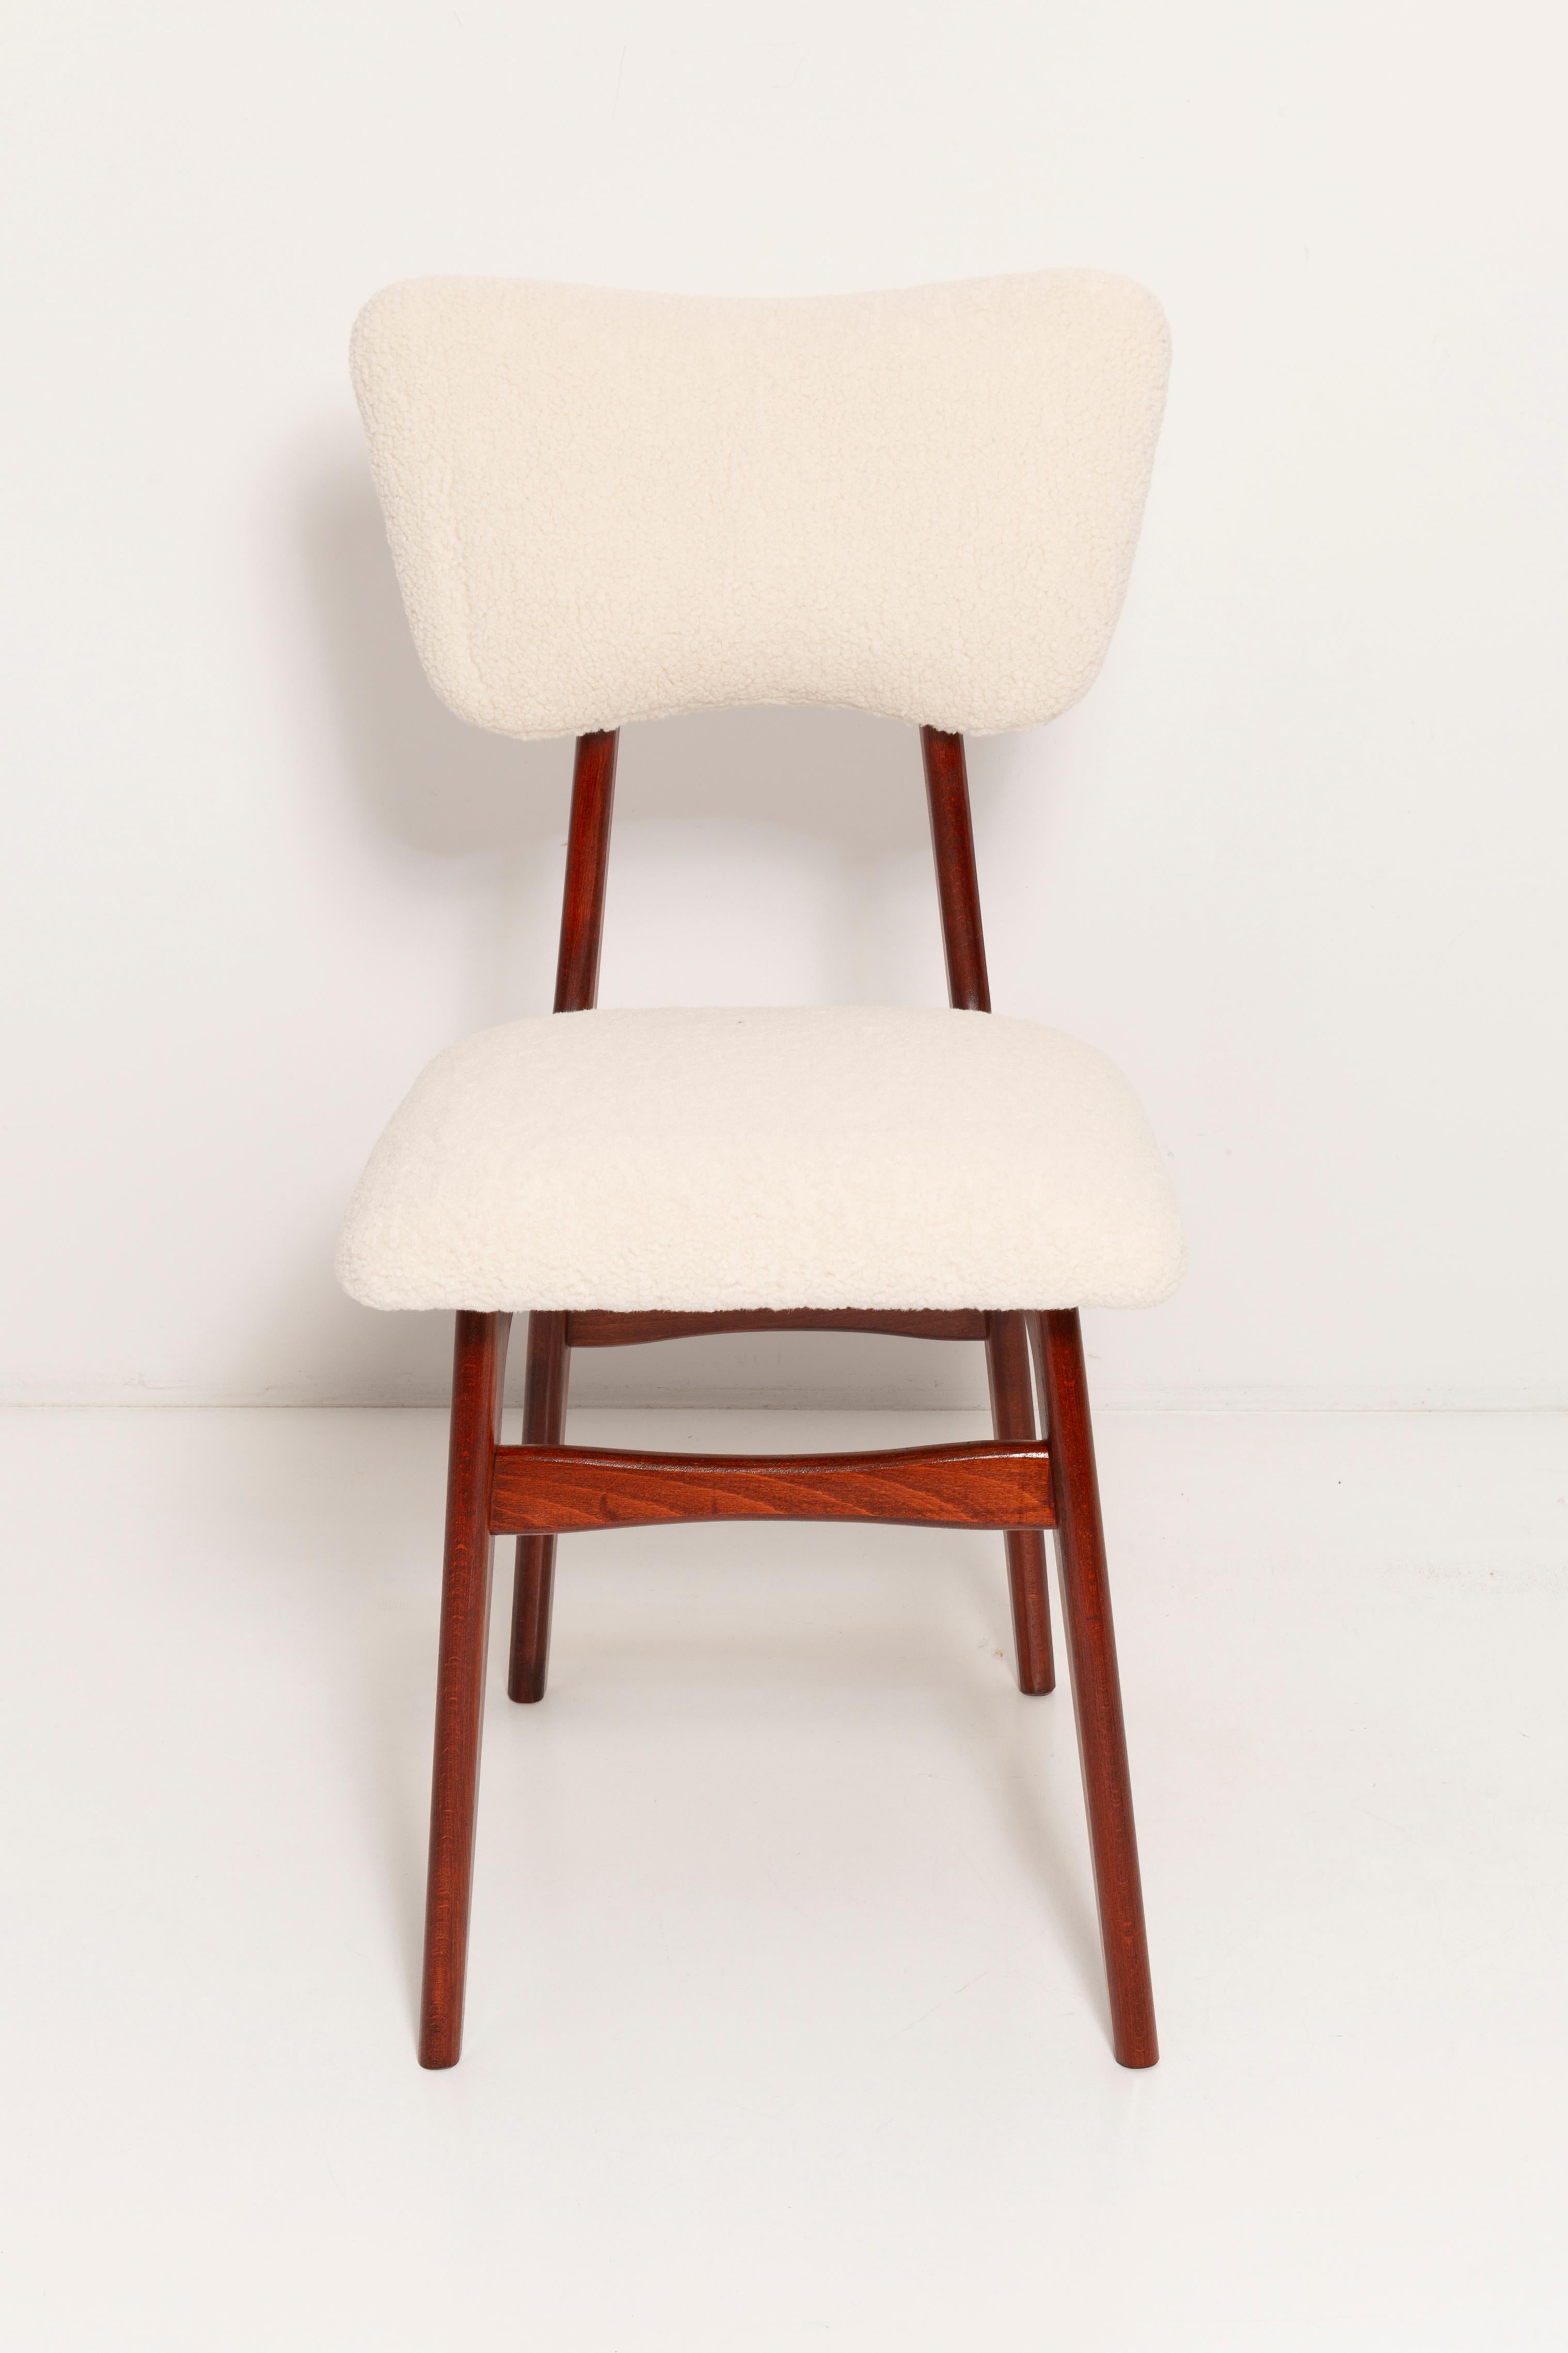 Twelve 20th Century Cream Boucle and Cherry Wood Butterfly Chairs, 1960s, Europe For Sale 9